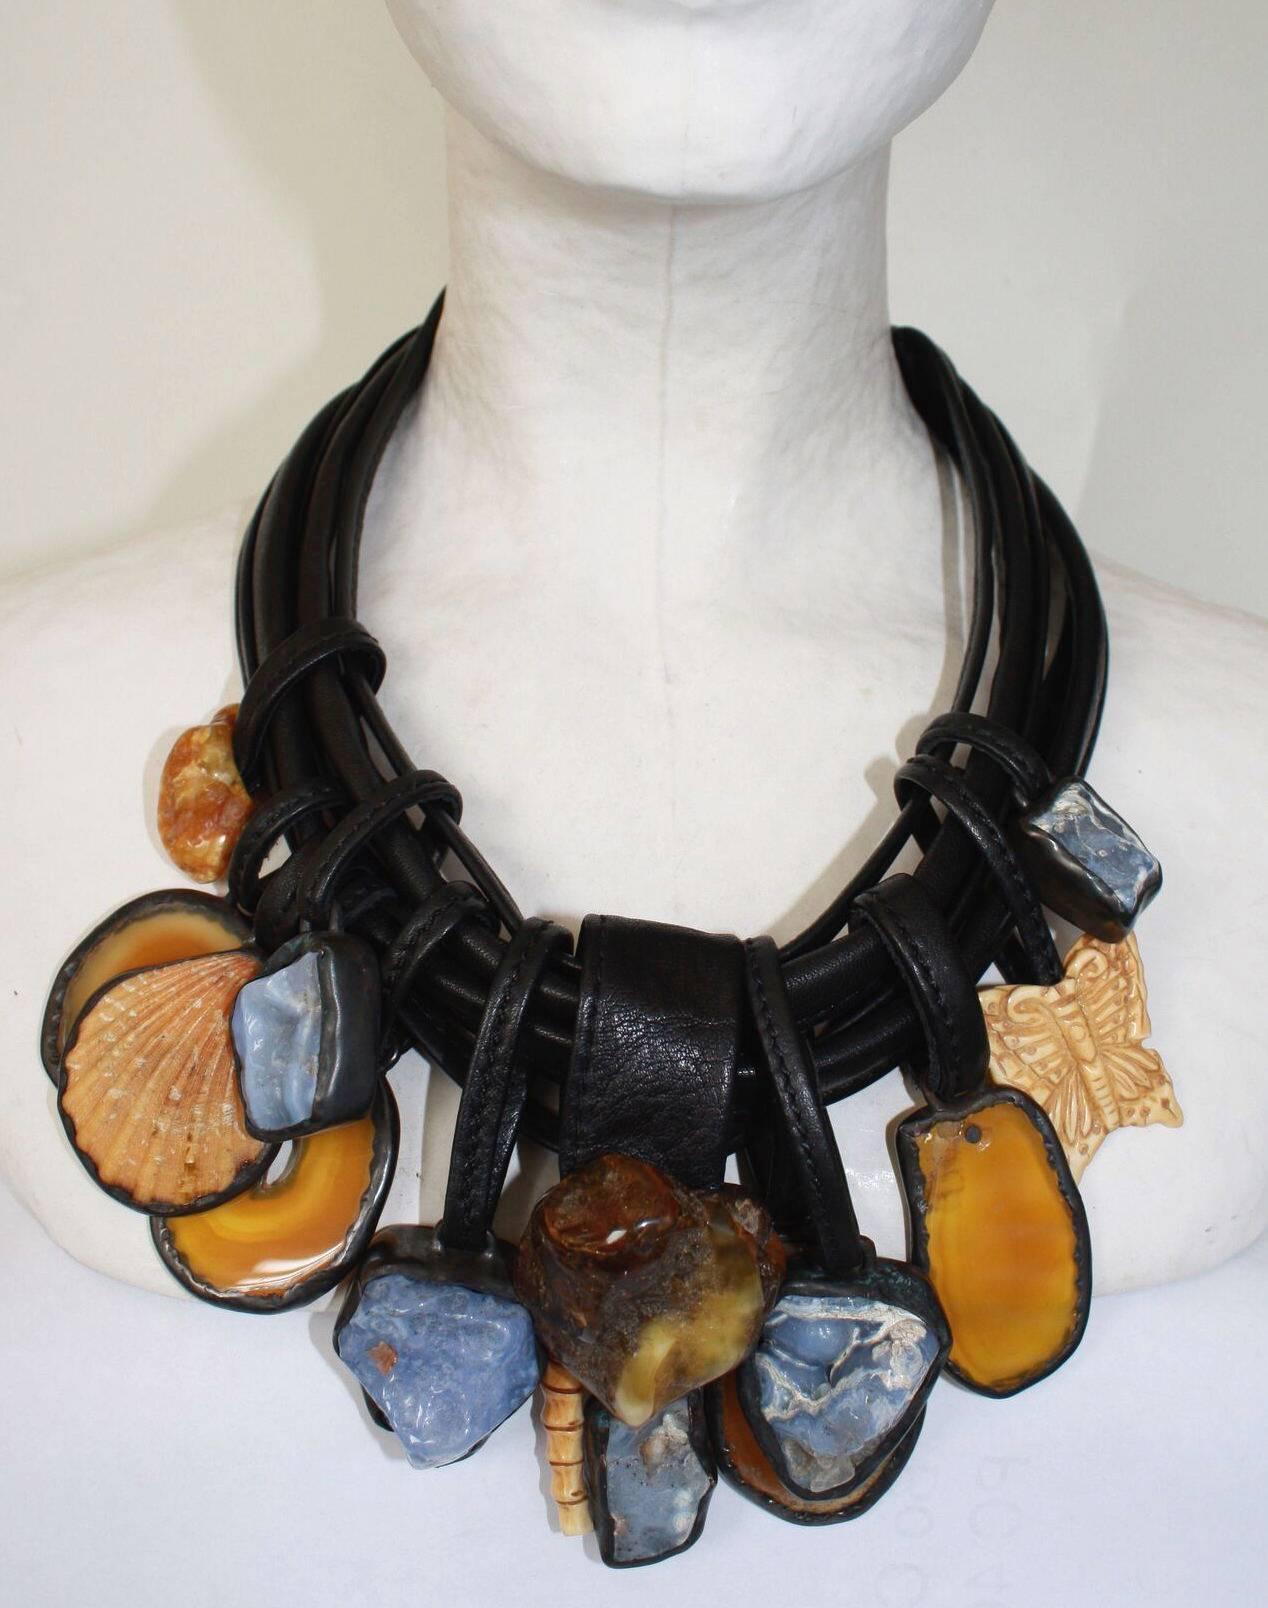 One of a kind statement necklace made with multiple strands of leather, chalcedony, amber, agate, shell, bone, and ebony drops from Monies.

20